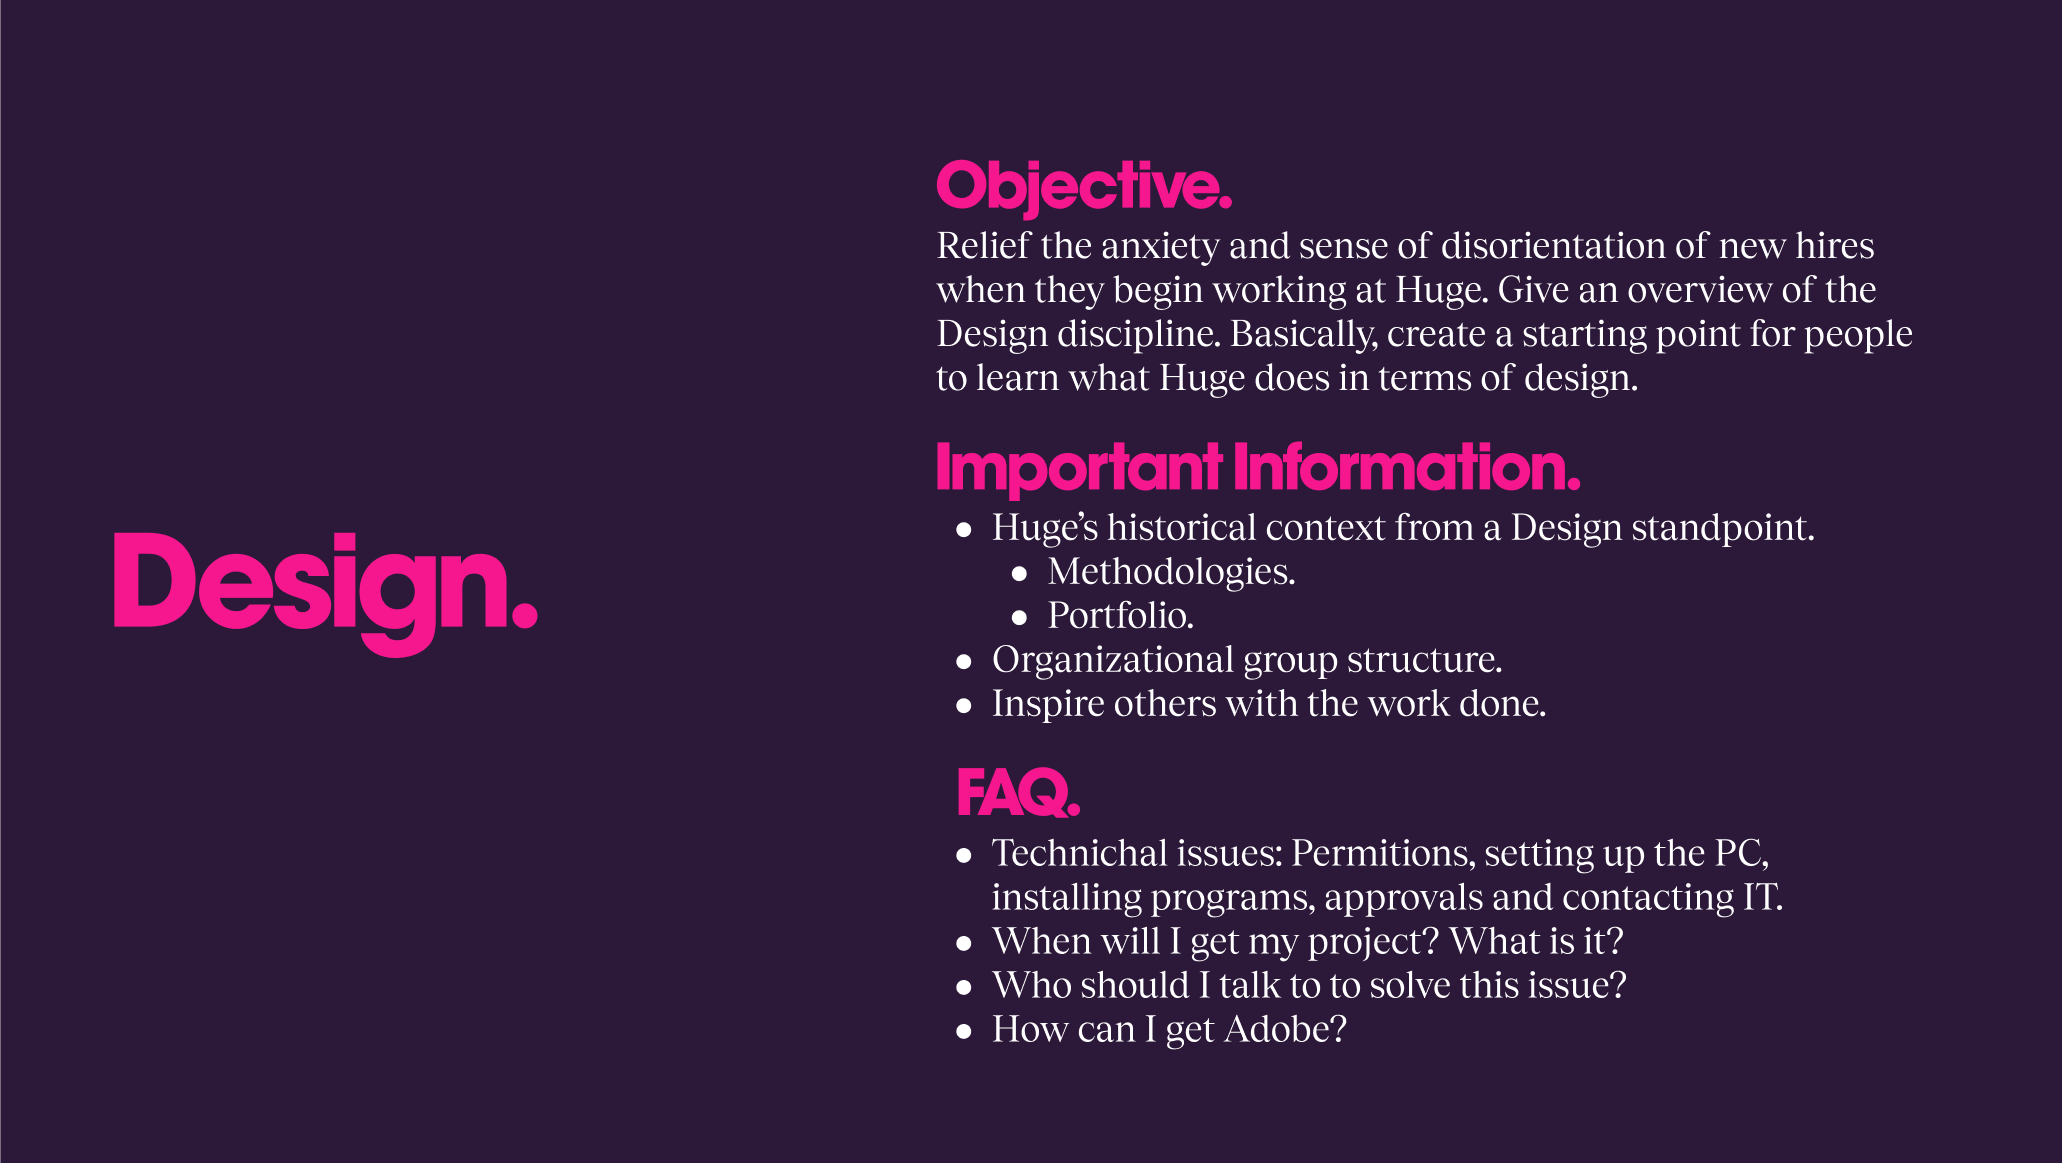 Information from one of the Design department onboarding